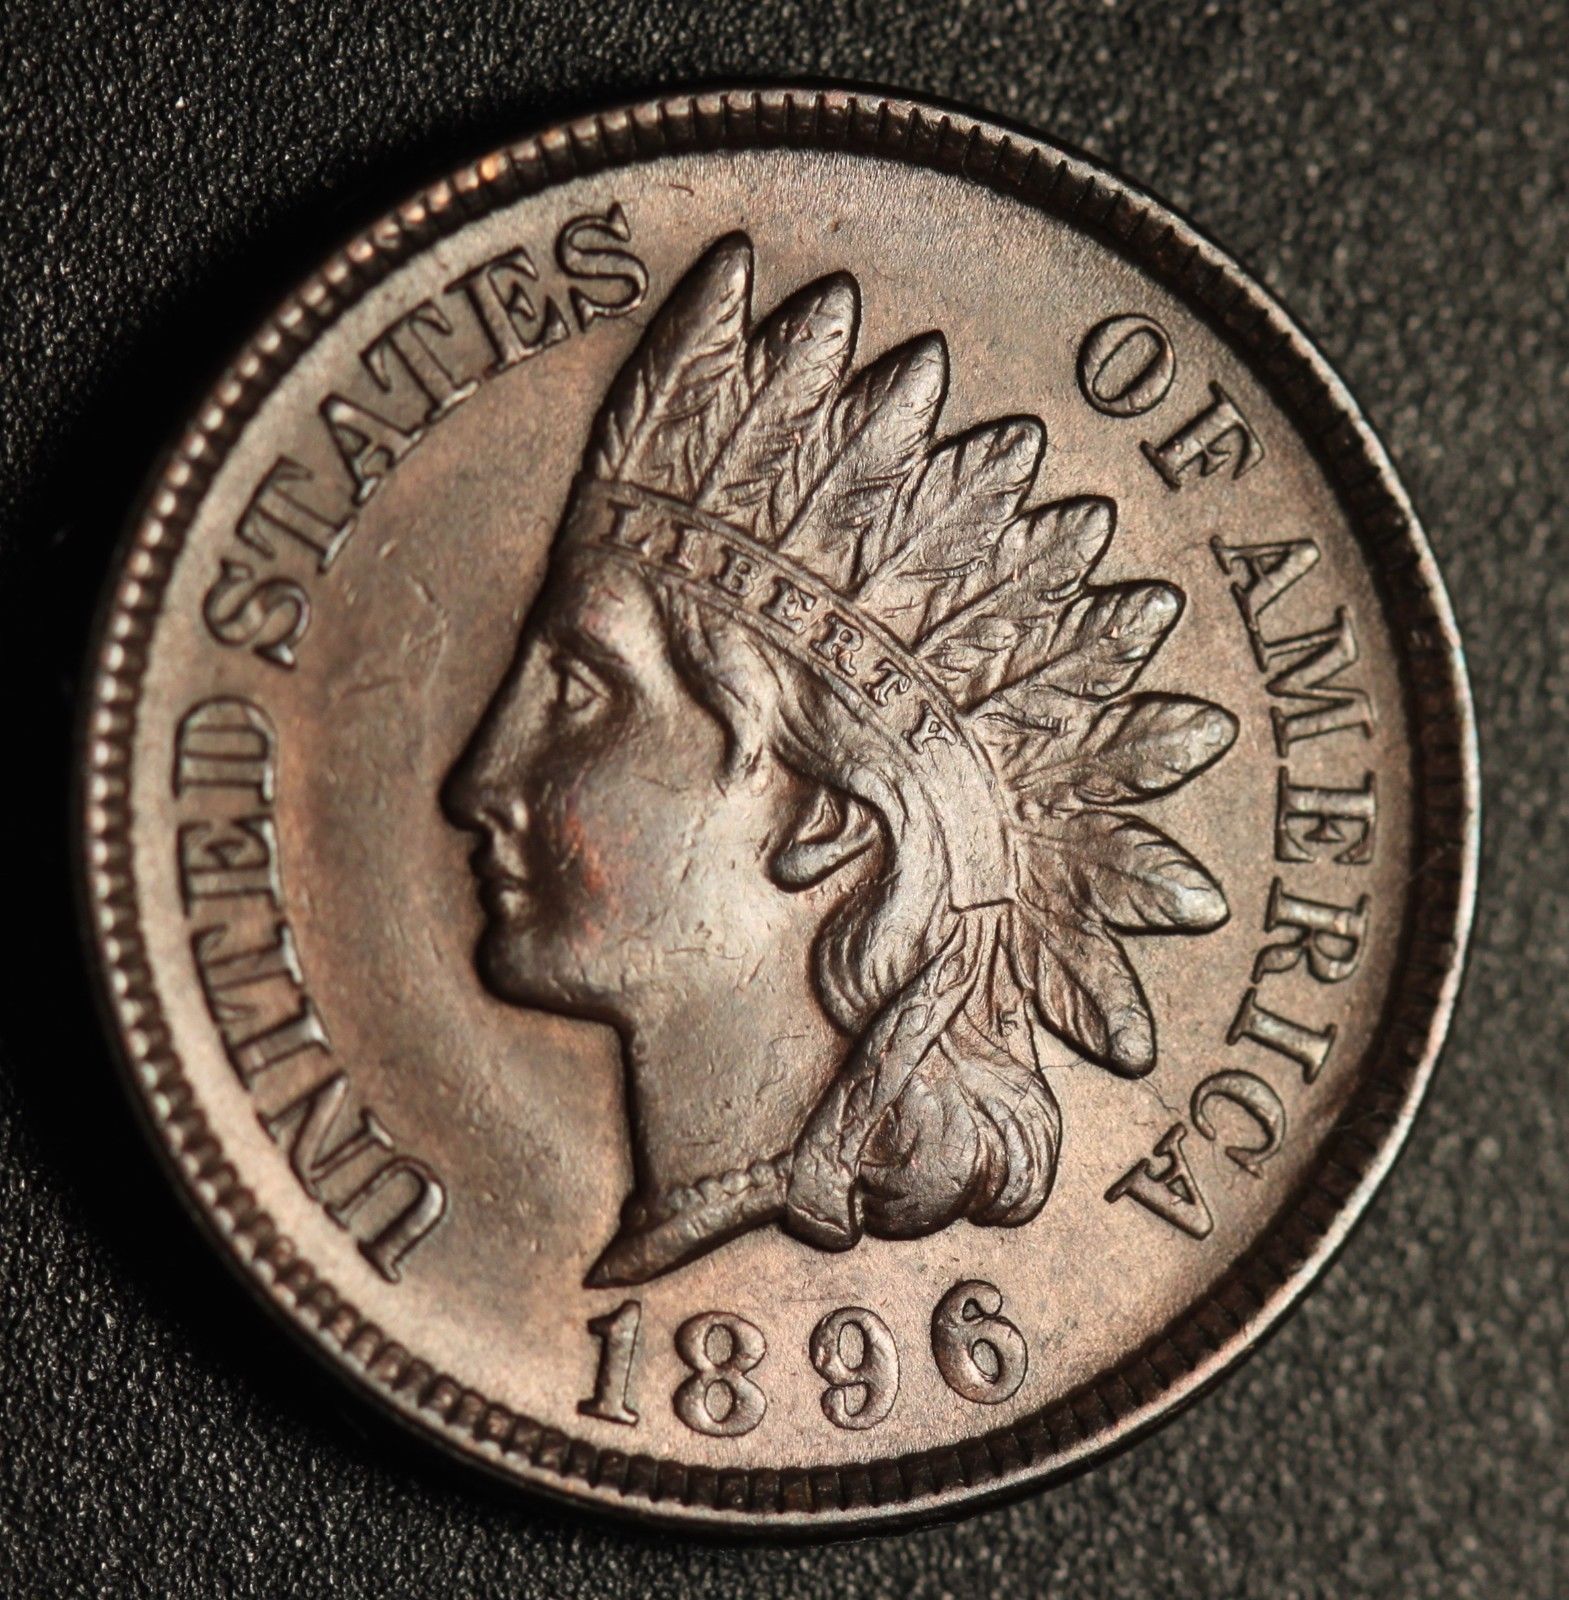 1896 RPD-012 - Indian Head Penny - Photo by Ed Nathanson